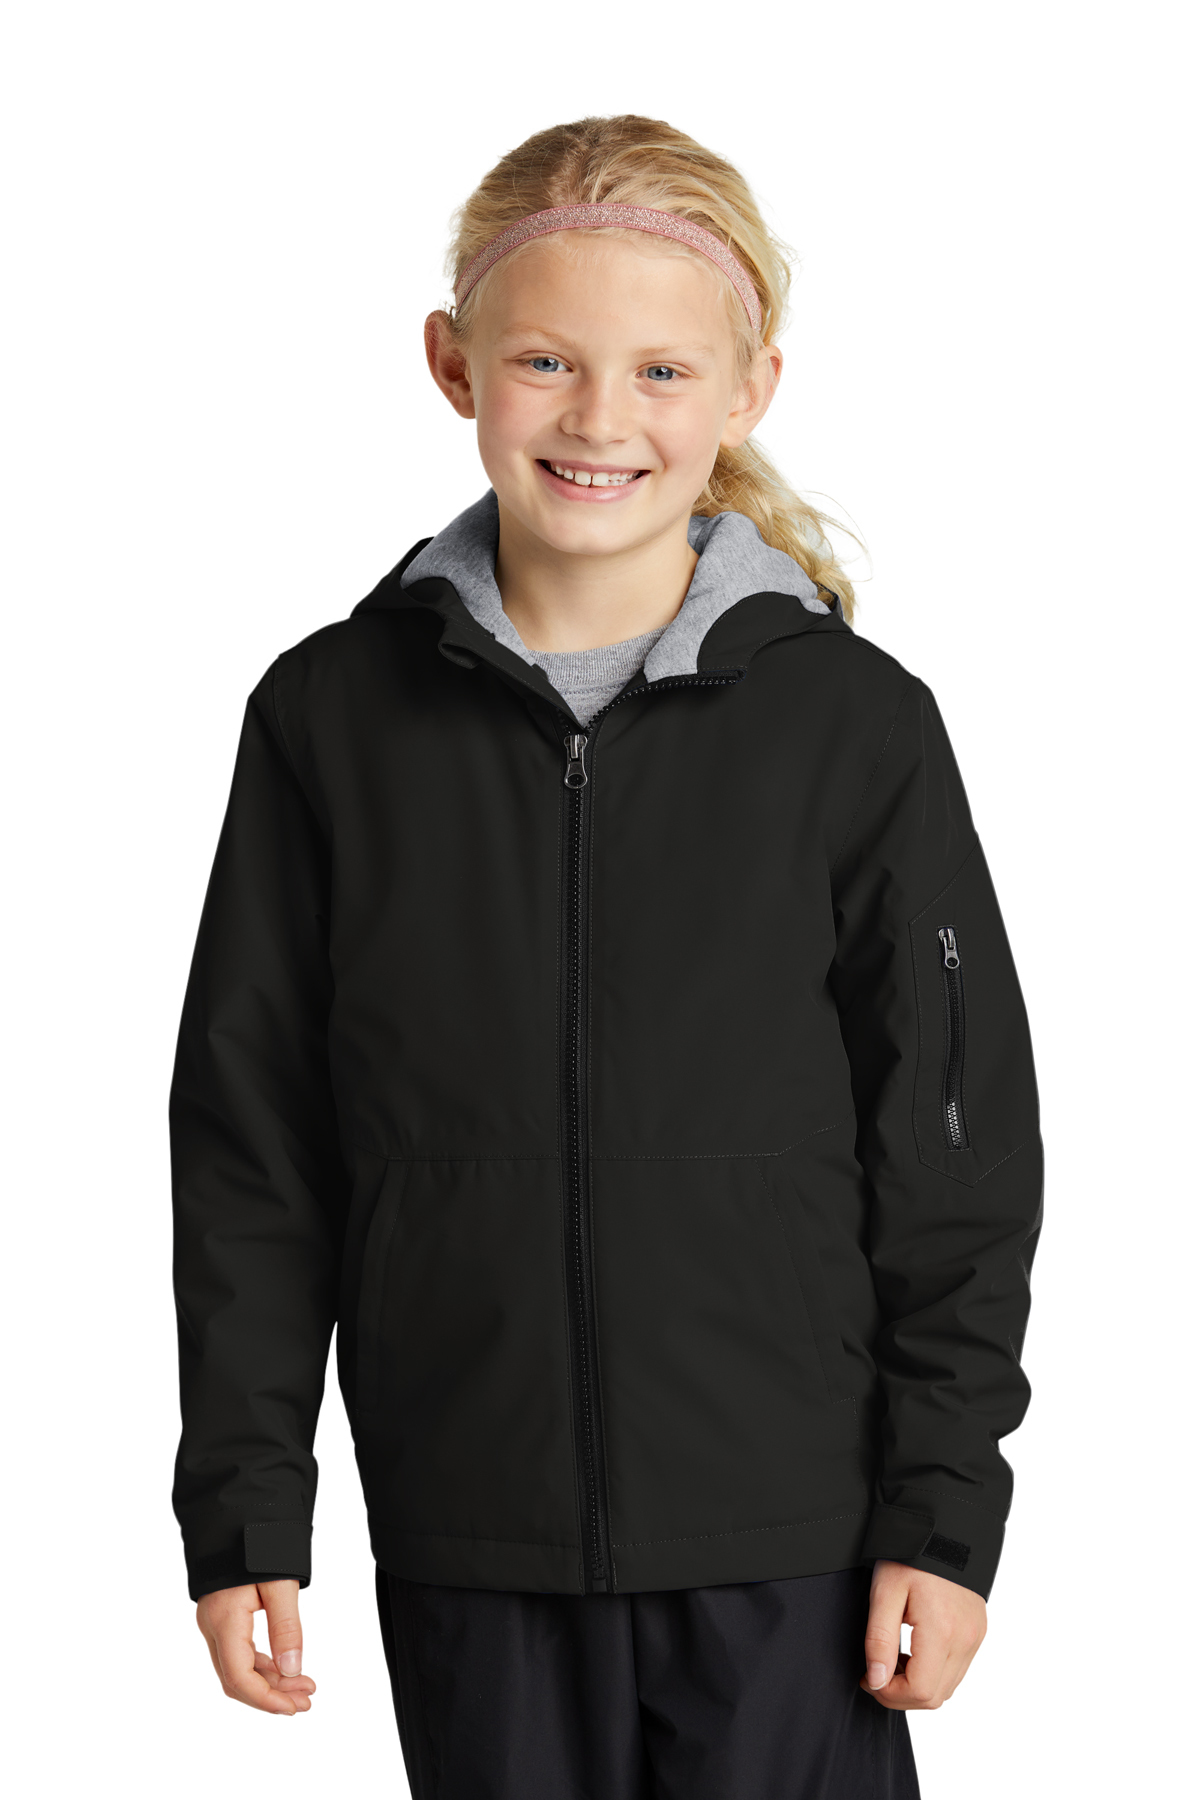  SPORT-TEK - Youth Wind Pant. YPST74 - X-Small - Black : Sports  & Outdoors